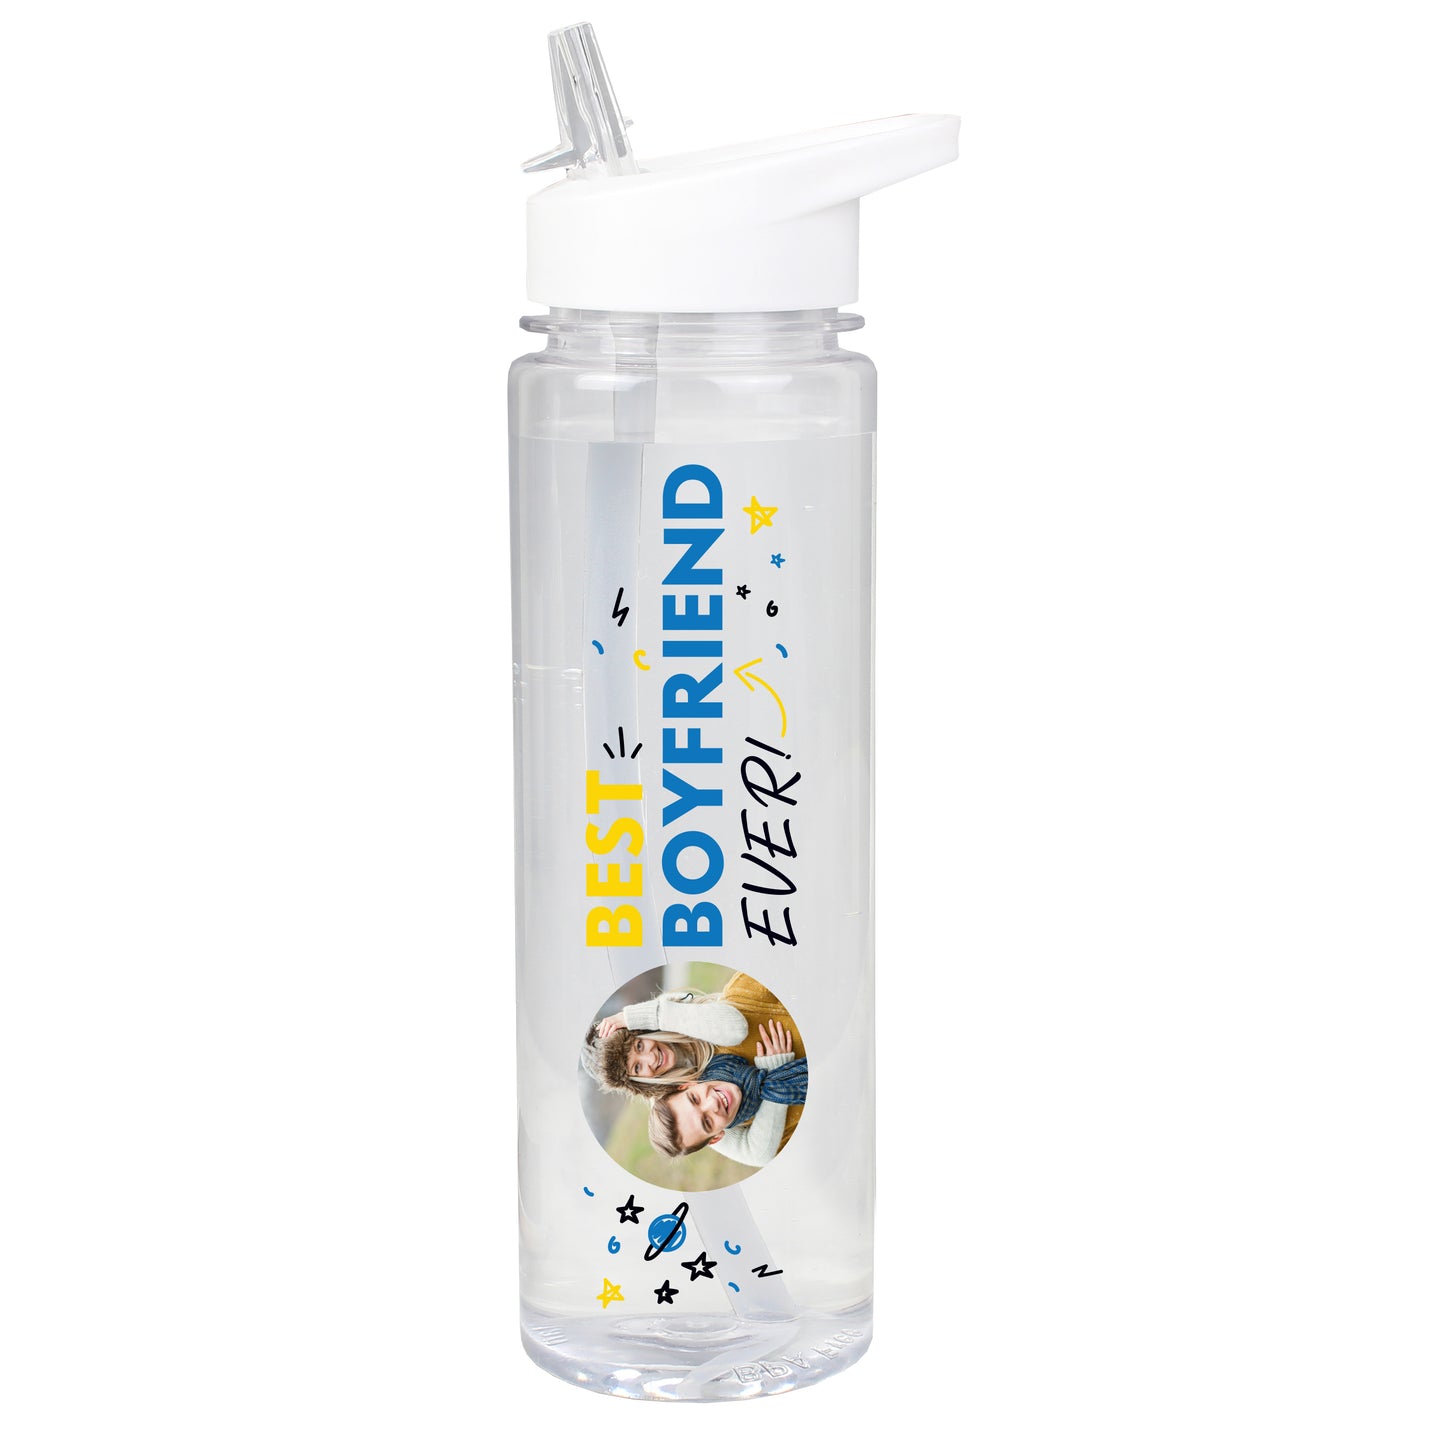 Personalised Water Bottle - “Best Ever” - UPLOAD YOUR OWN PHOTO! - Violet Belle Gifts - Personalised Water Bottle - “Best Ever” - UPLOAD YOUR OWN PHOTO!